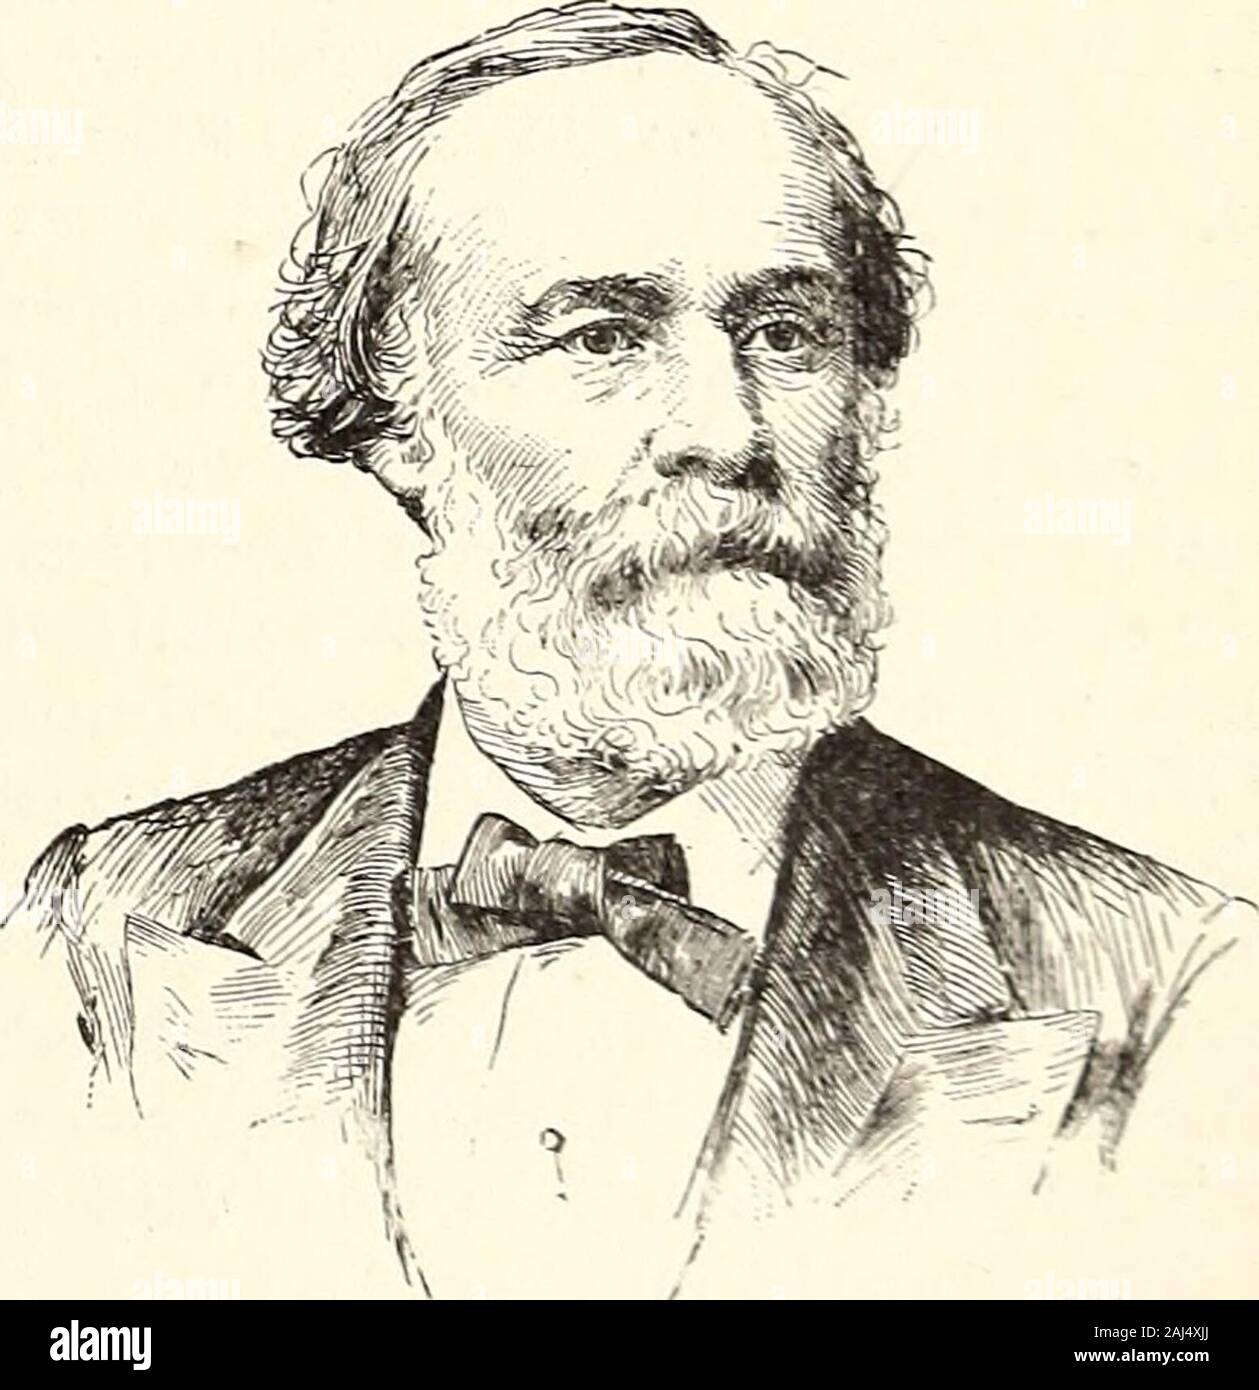 Appletons' cyclopædia of American biography . othe Loyalists convention in Philadelphia, and in1875 he succeeded Charles Sumner in the senate,and was re-elected in 1881 and 1887. He has beenchairman of the committee on ways and means,,has served on committee on public buildings andgrounds, and inaugurated the measure by which,the completionof the Wash-ington monu-ment was un-dertaken. Heis the authorof many tariffmeasures, andassisted in theconstruction ofthe wool andwoollen tariffof 1868, whichwas the basisof all wool andwoollens fromthat time until1883. He isalso a memberof the commit-tees o Stock Photo